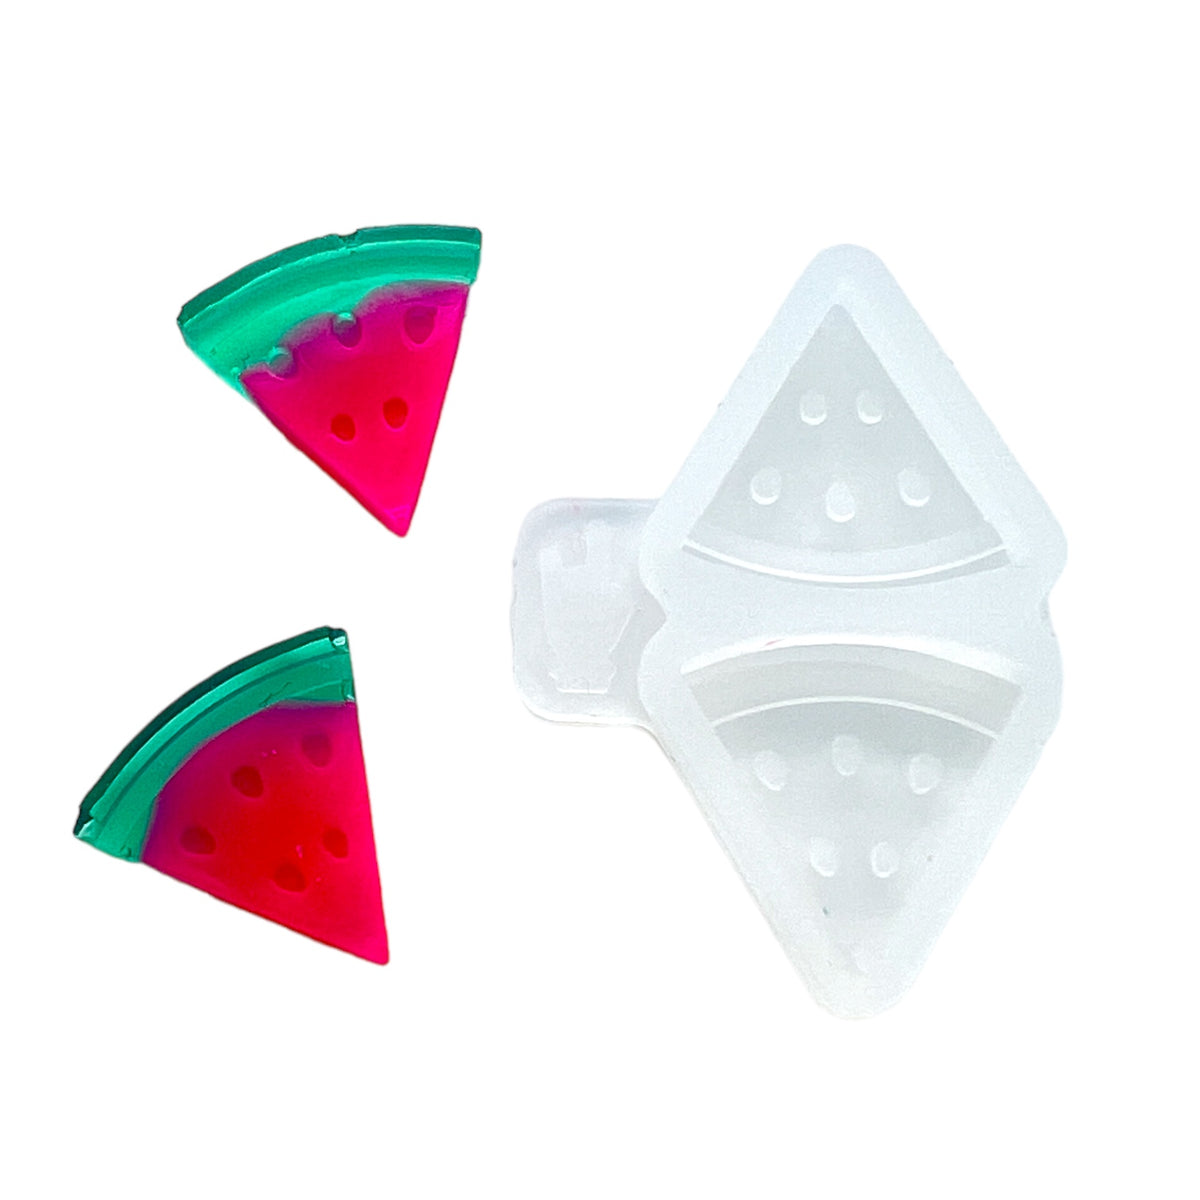 Tiny Watermelon Slice Resin Rockers Exclusive Stud Earring Mold for UV and Epoxy Resin